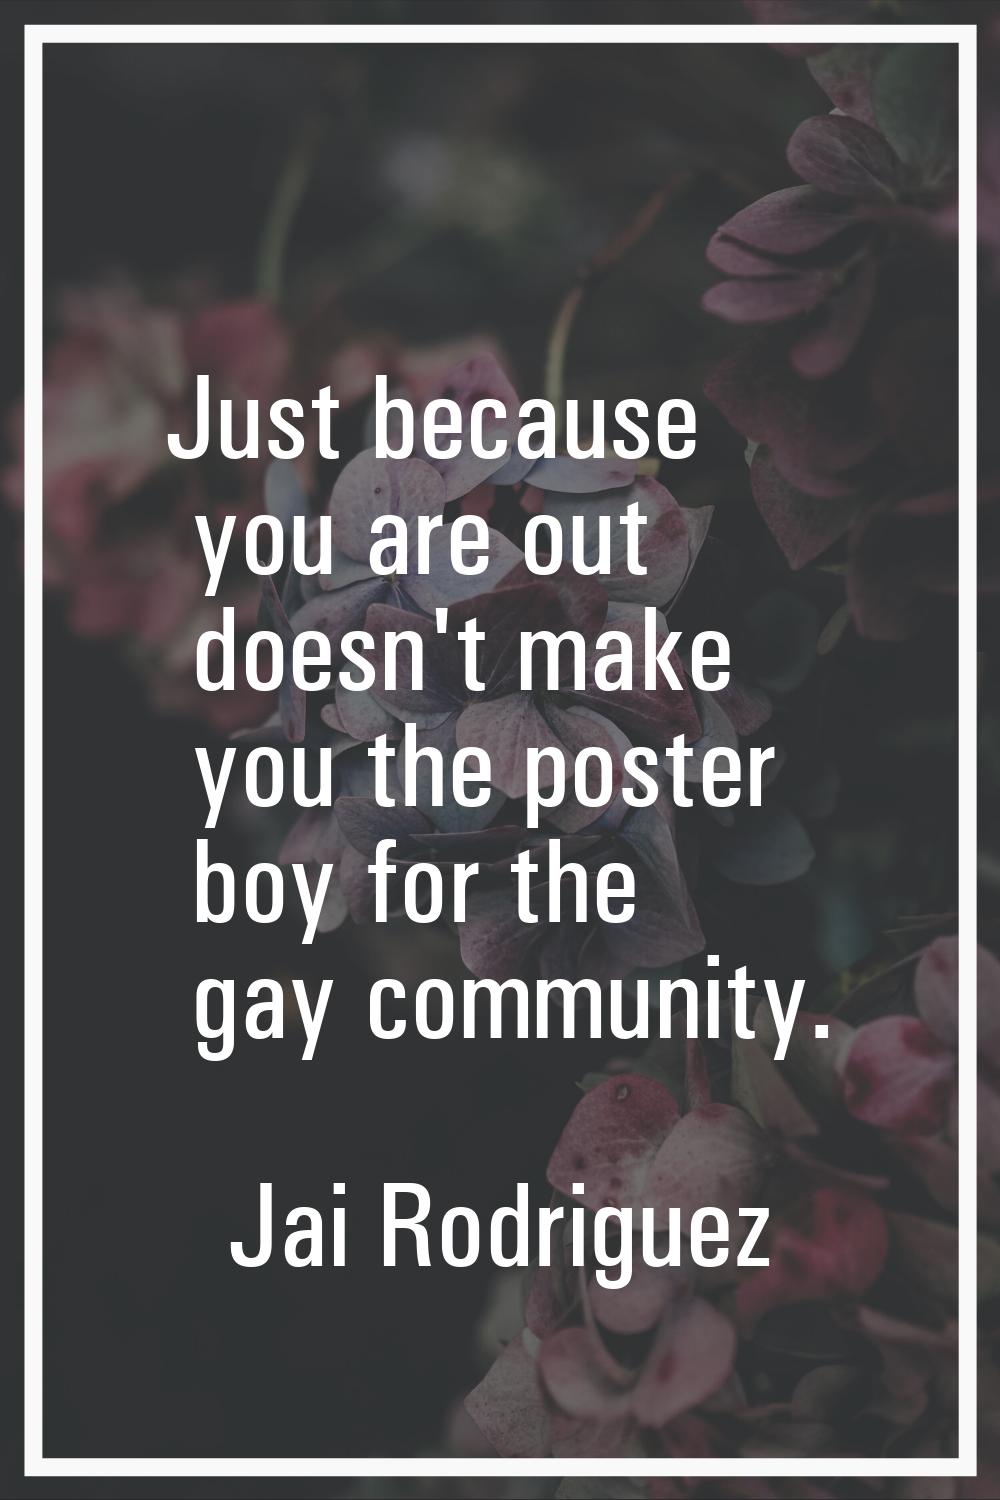 Just because you are out doesn't make you the poster boy for the gay community.